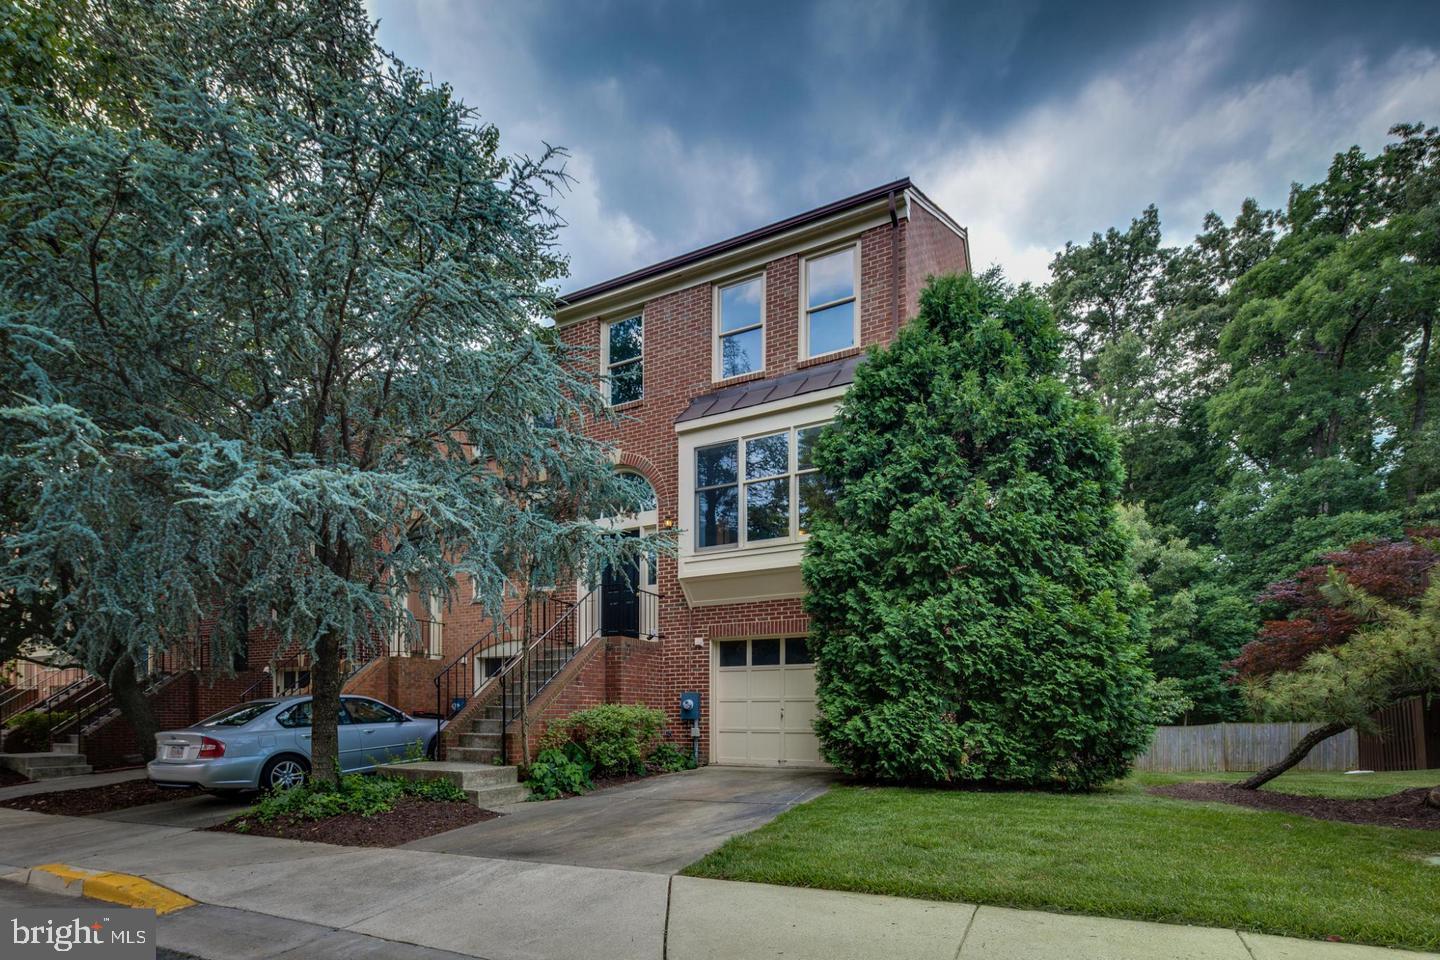 View Rockville, MD 20852 townhome